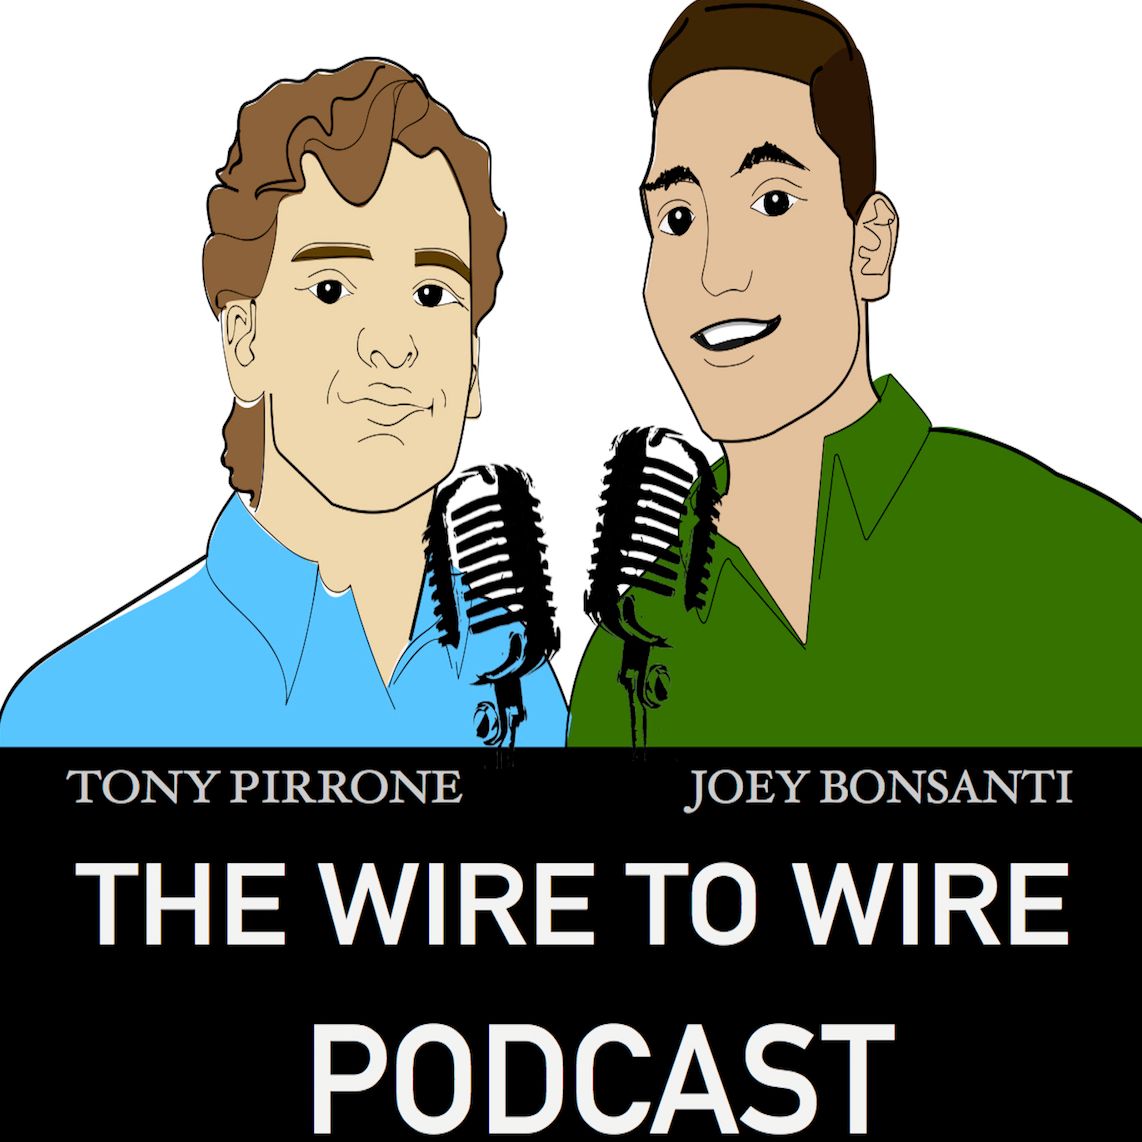 The Wire to Wire Podcast